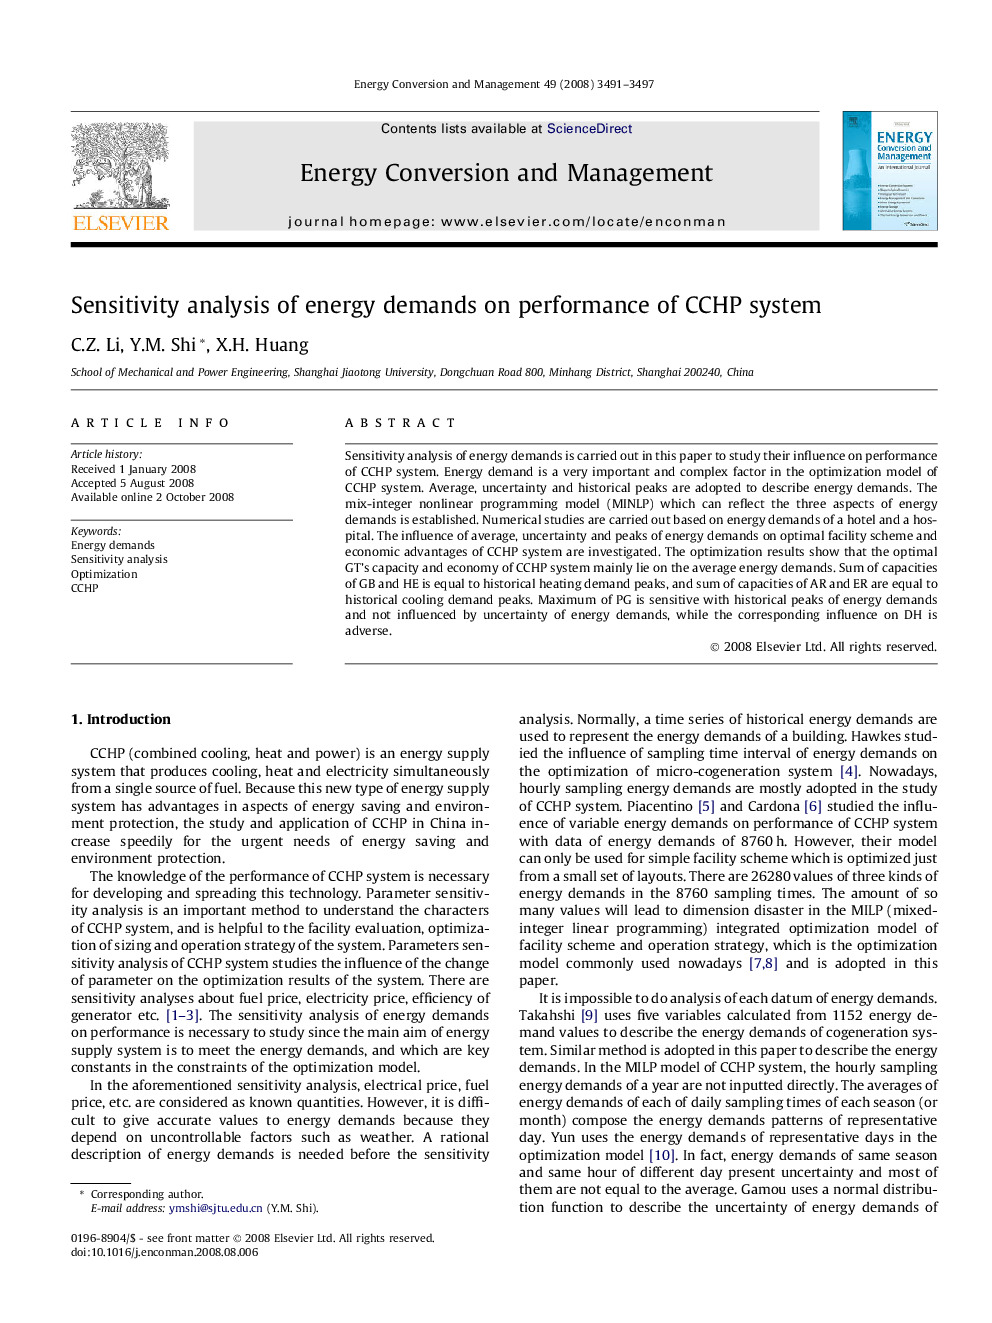 Sensitivity analysis of energy demands on performance of CCHP system